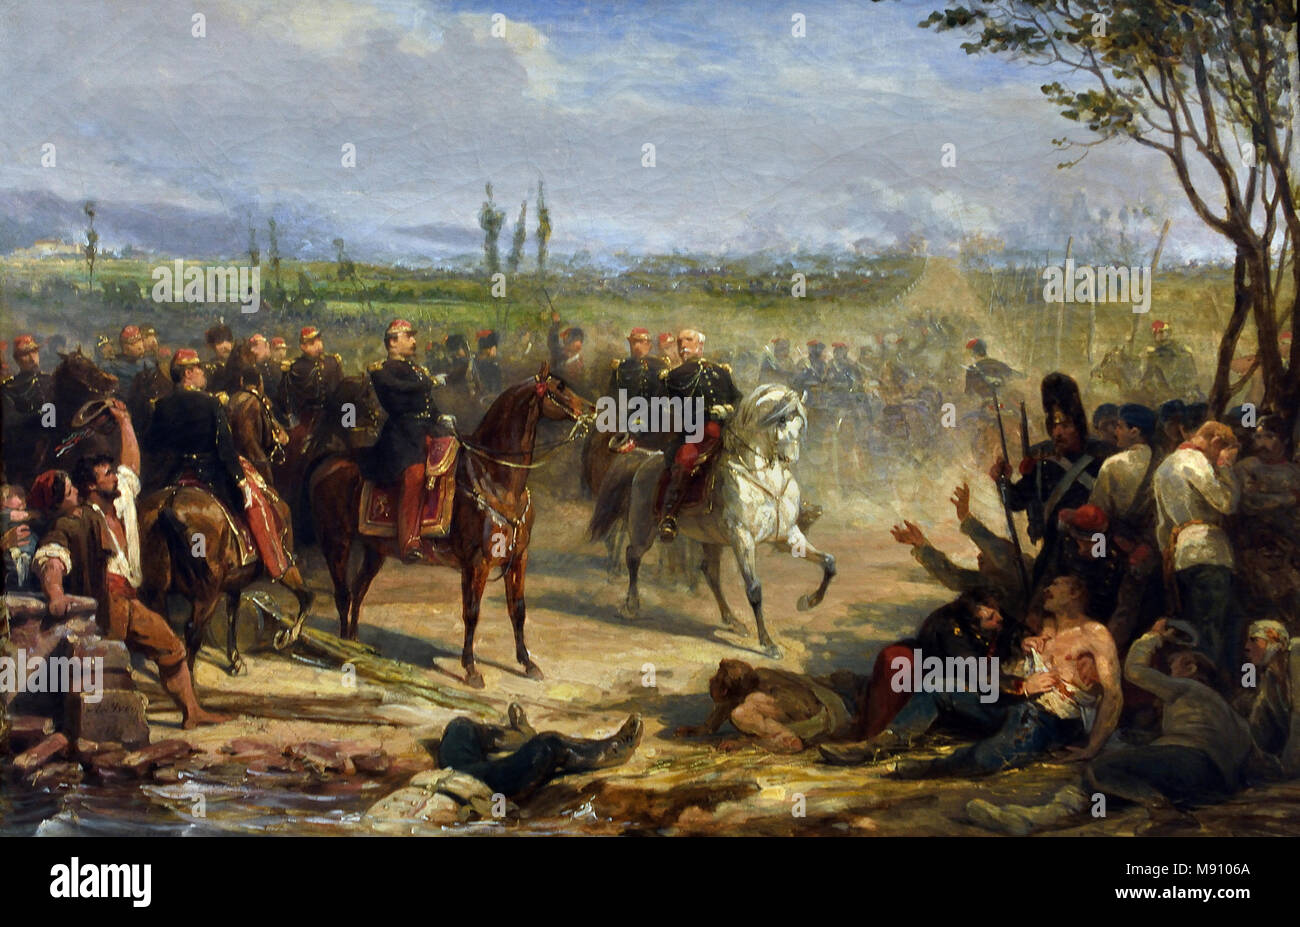 Magenta (June 4, 1859) 1864 Frédéric Adolphe YVON, 1817 - 1893, France, French, ( The Battle of Magenta was fought on 4 June 1859 during the Second Italian War of Independence, resulting in a French-Sardinian victory under Napoleon III against the Austrians under Marshal Ferencz Gyulai. ) , Stock Photo